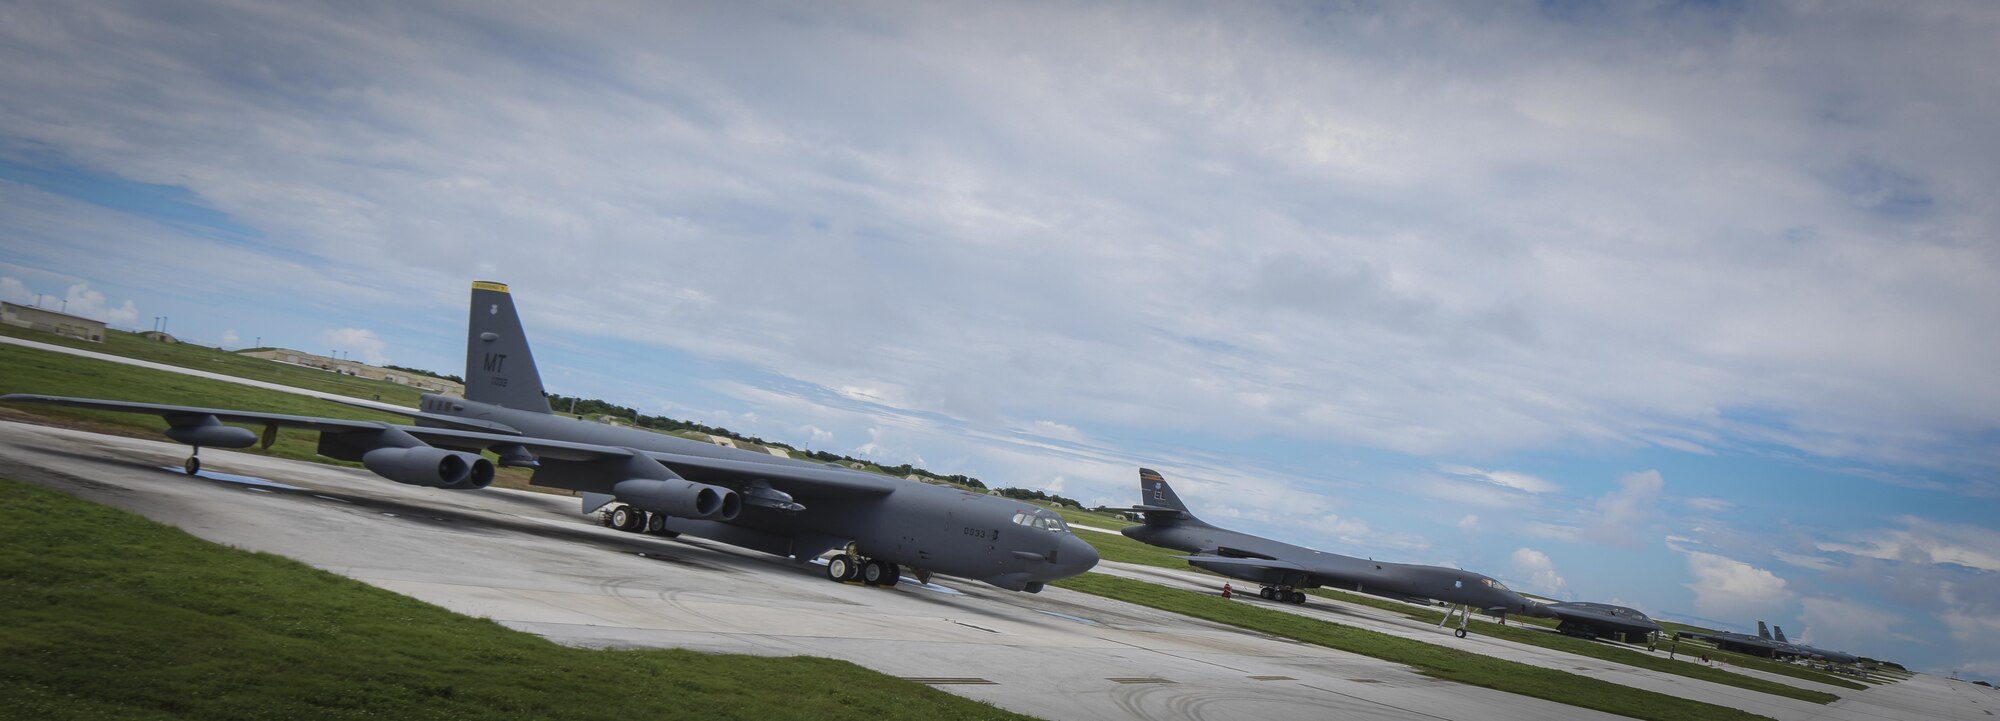 A B-52 Stratofortress, B-1 Lancer and B-2 Spirit sit beside one another on the flightline at Andersen Air Force Base, Guam, Aug.10, 2016. This marks the first time in history that all three of Air Force Global Strike Command's strategic bomber aircraft are simultaneously conducting operations in the U.S. Pacific Command area of operations. The B-1 Lancer, which arrived at Andersen Aug. 6, will replace the B-52 in support of the U.S. Strategic Command Continuous Bomber Presence mission. The CBP bomber swap between the B-1 and B-52 is occurring throughout the month of August as the B-1s return to support this mission for the first time since April 2006. In addition to the CBP bomber swap, three B-2s arrived in theater to conduct a Bomber Assurance and Deterrence deployment. The CBP mission and BAAD deployments are part of a long-standing history of maintaining a consistent bomber presence in the Indo-Asia-Pacific in order to maintain regional stability, and provide assurance to our allies and partners in the region. (U.S. Air Force photo by Tech. Sgt. Richard Ebensberger)